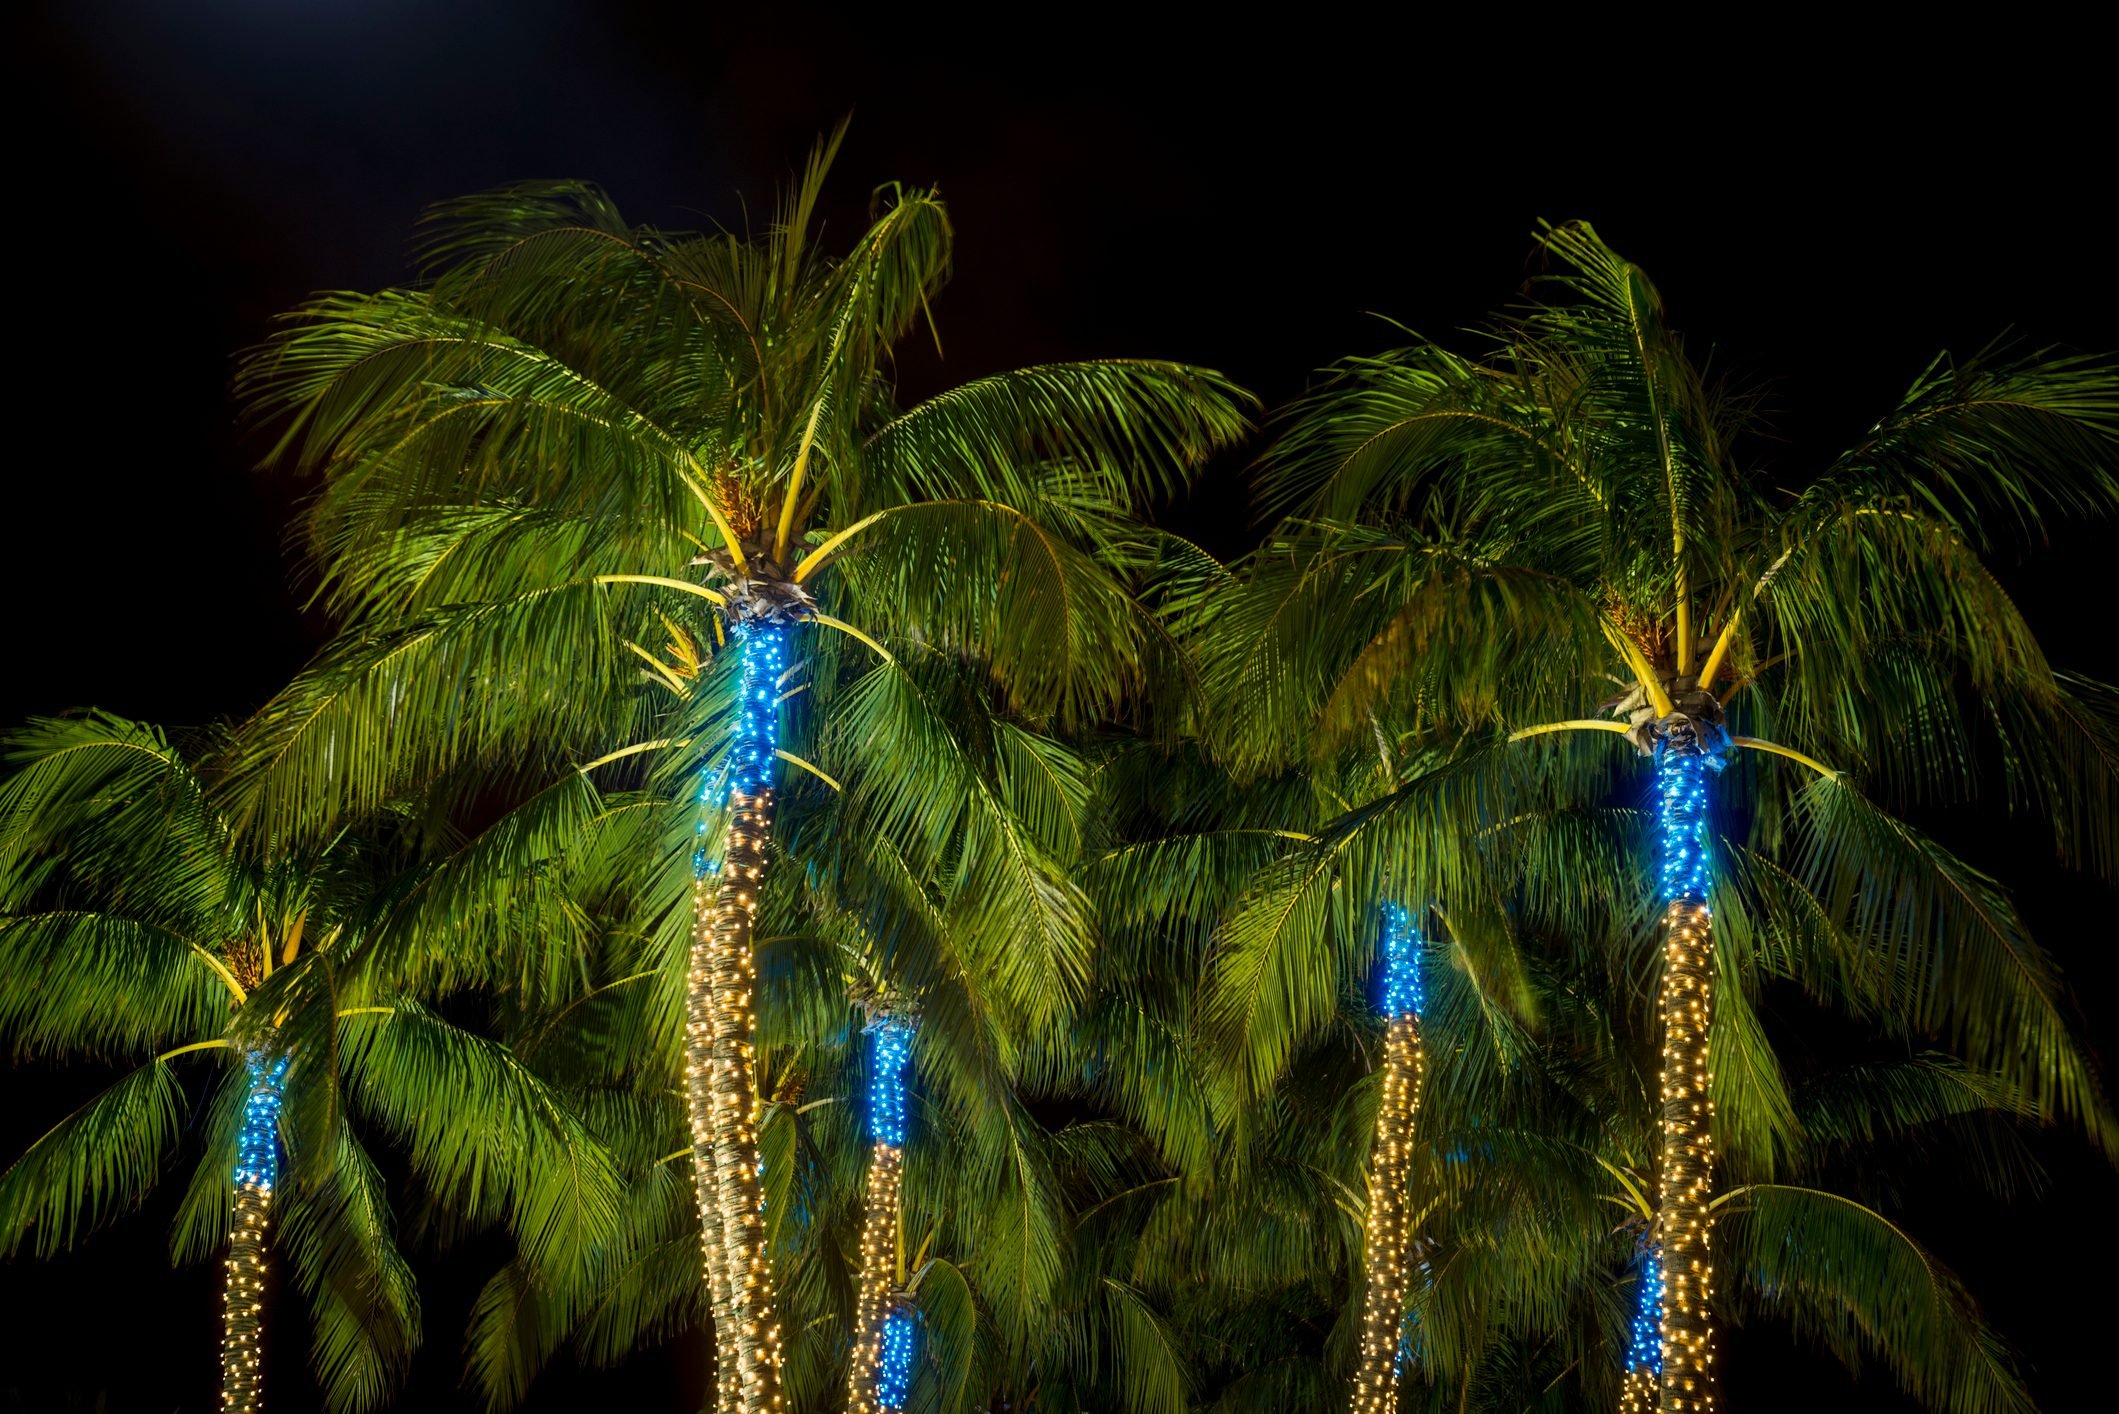 Is It Safe to Hang Christmas Lights On Palm Trees?